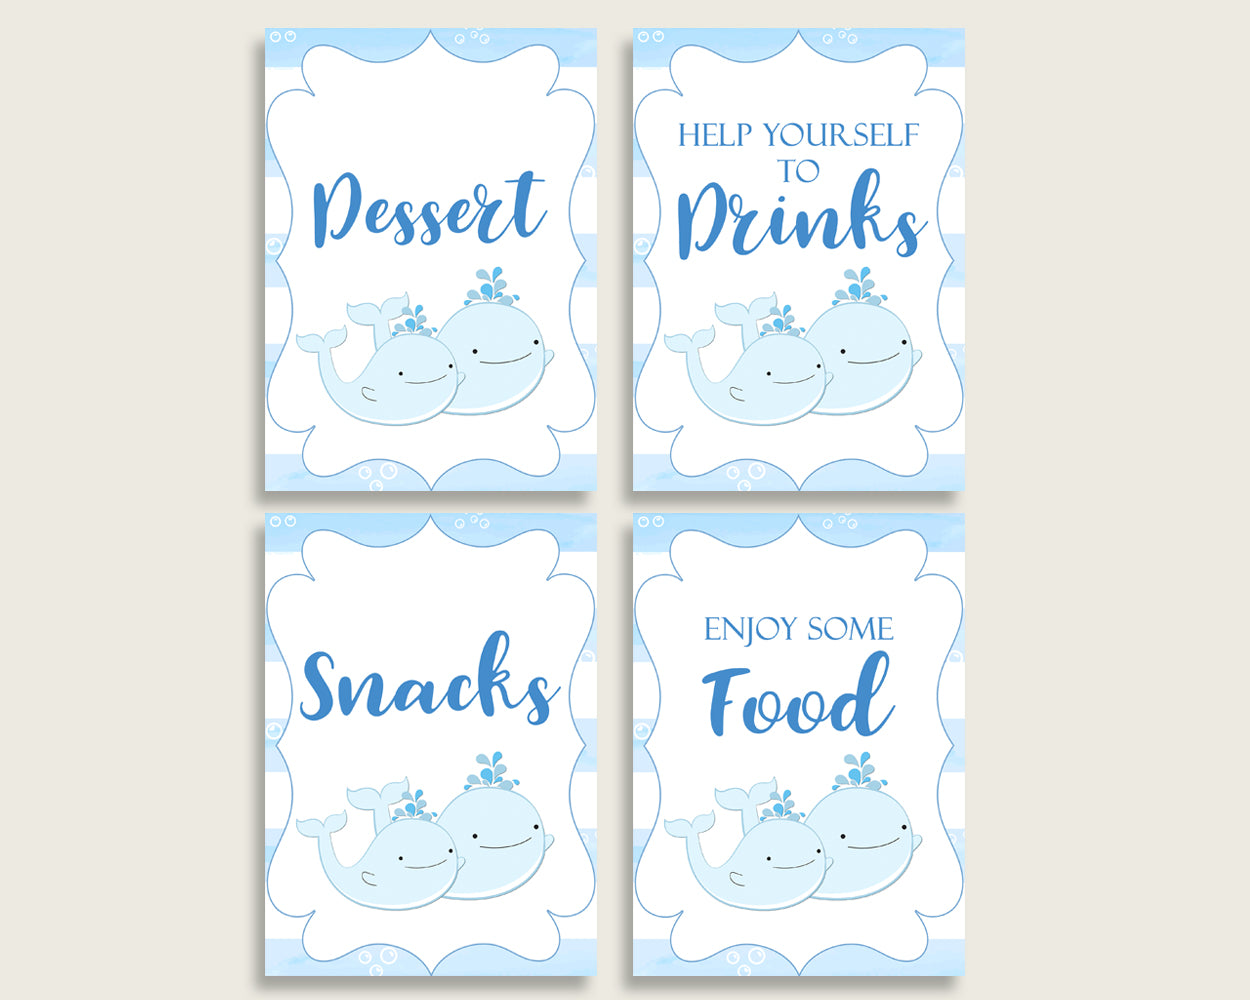 Whale Baby Shower Boy Table Signs Printable, Blue White Party Table Decor, Favors, Food, Drink, Treat, Guest Book, Instant Download, wbl01